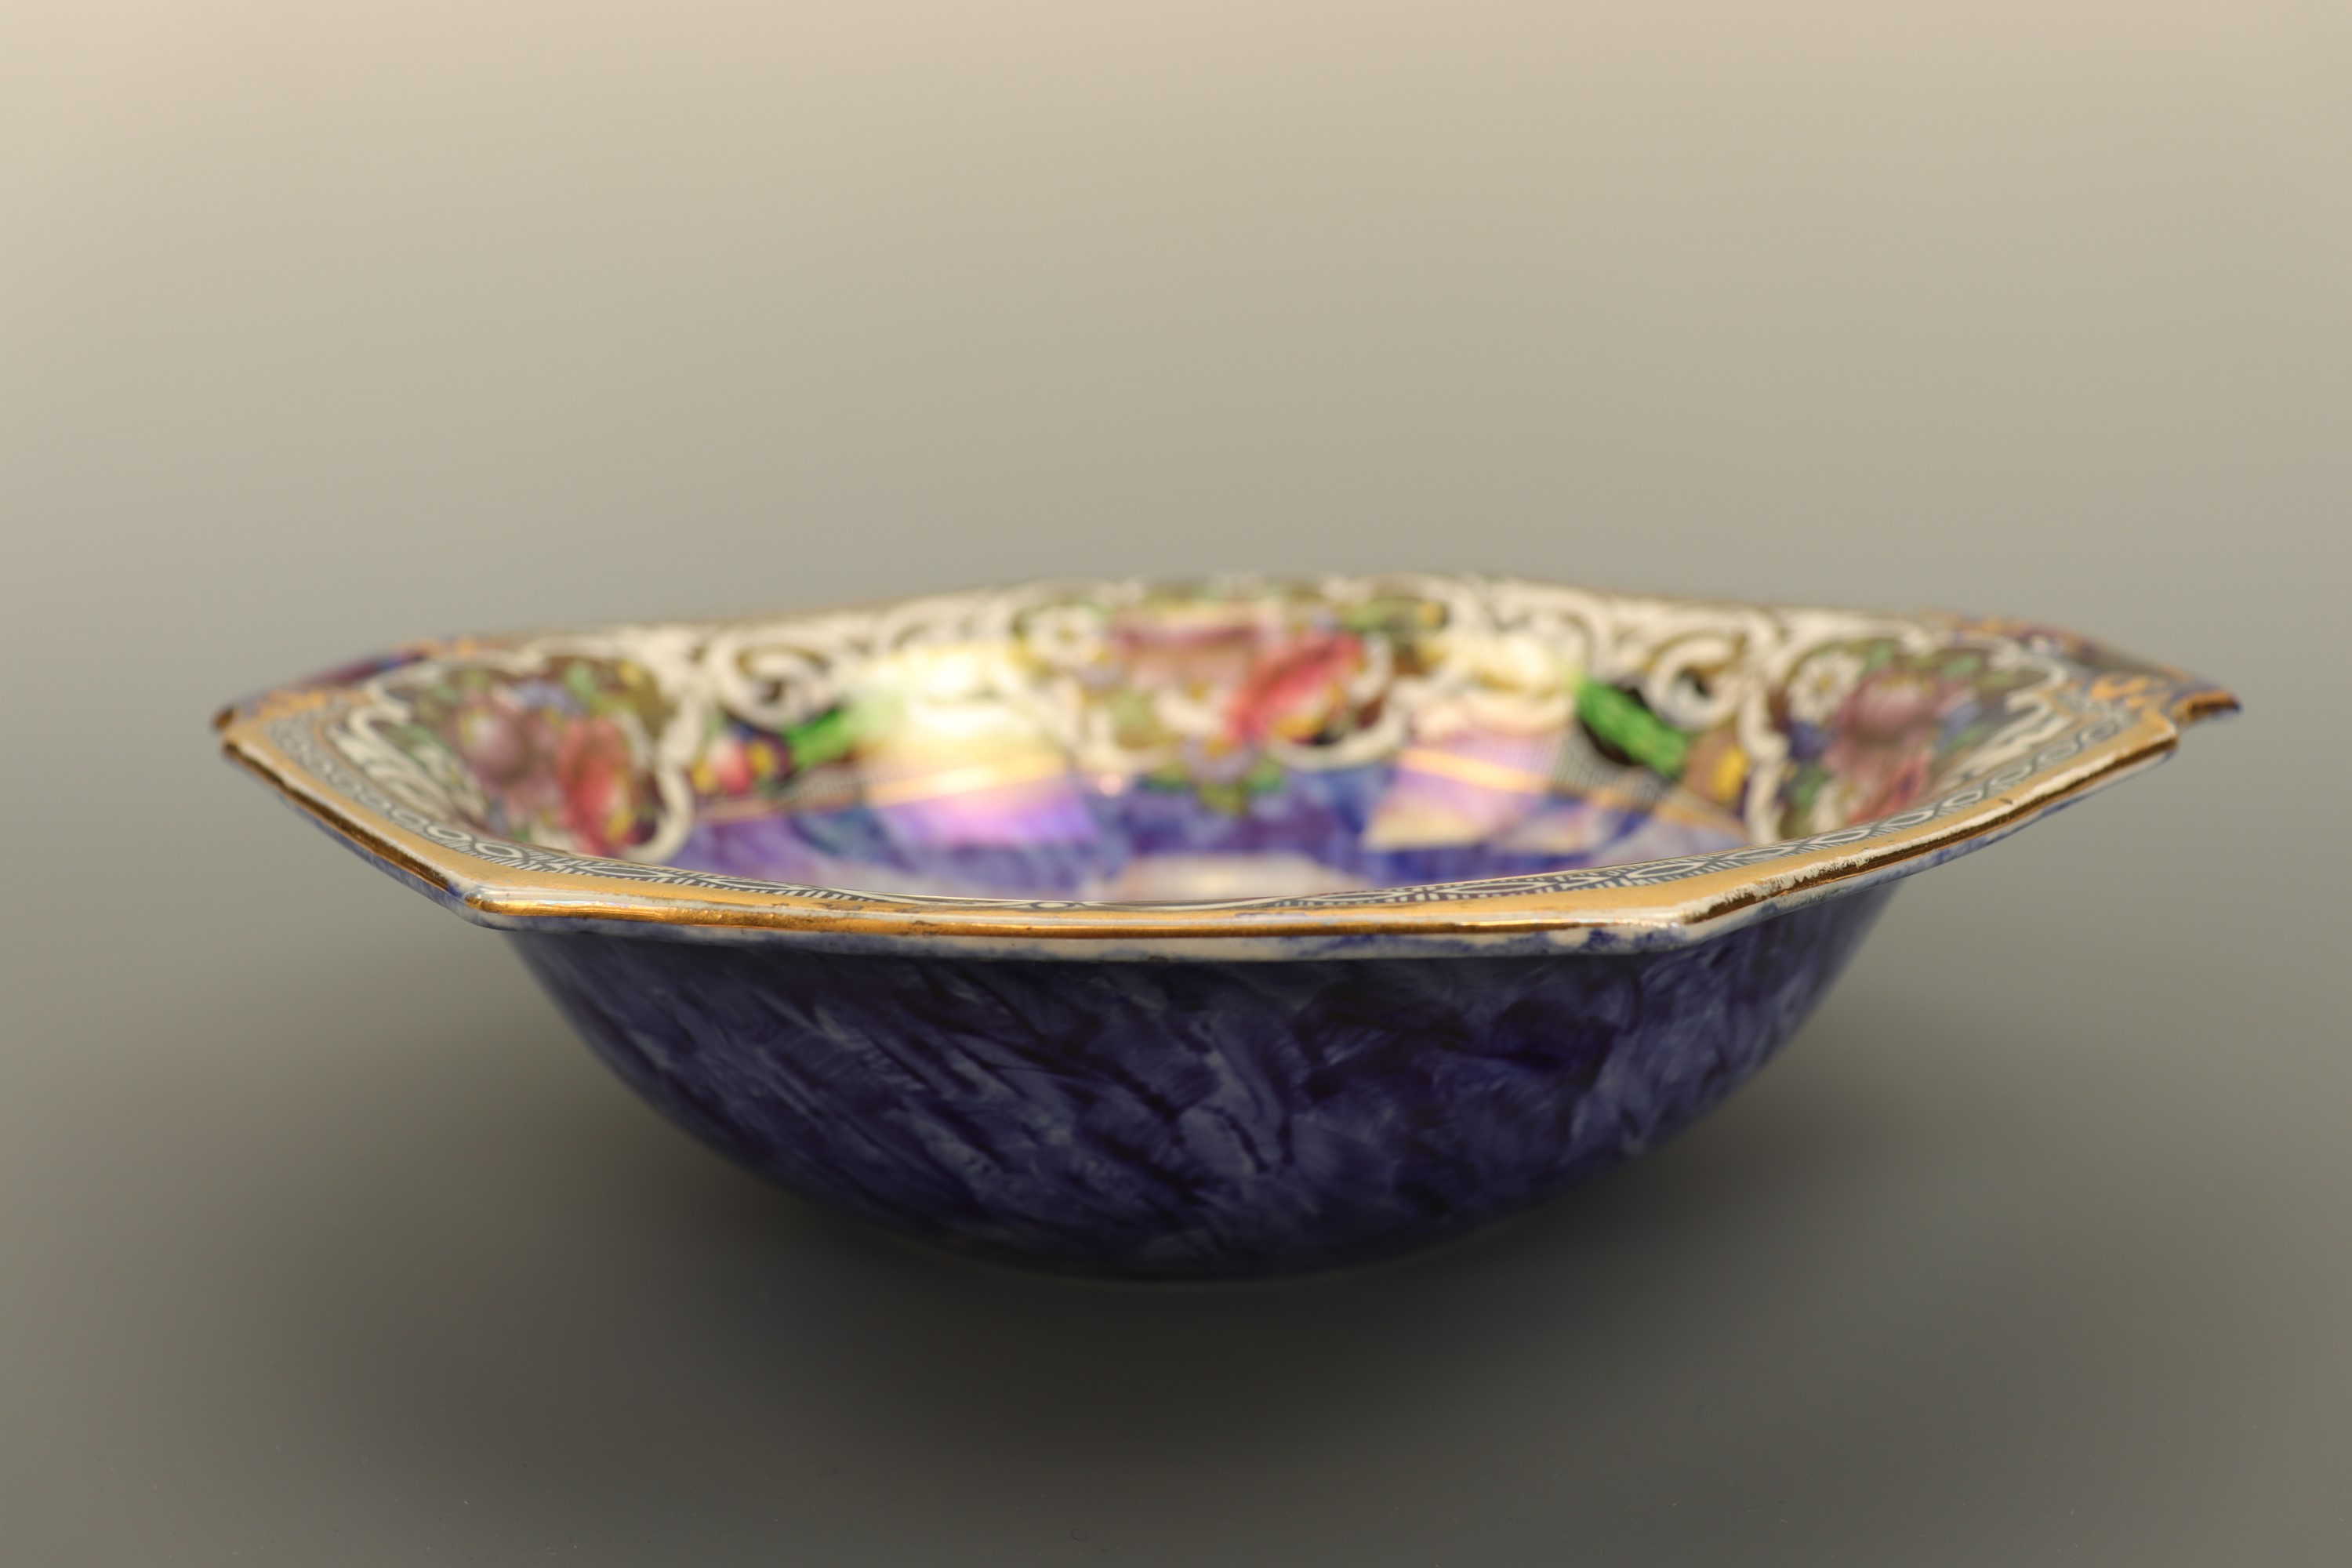 A 1920s Newhall Boumier Ware lustre bowl, 26 cm x 23 cm - Image 2 of 3